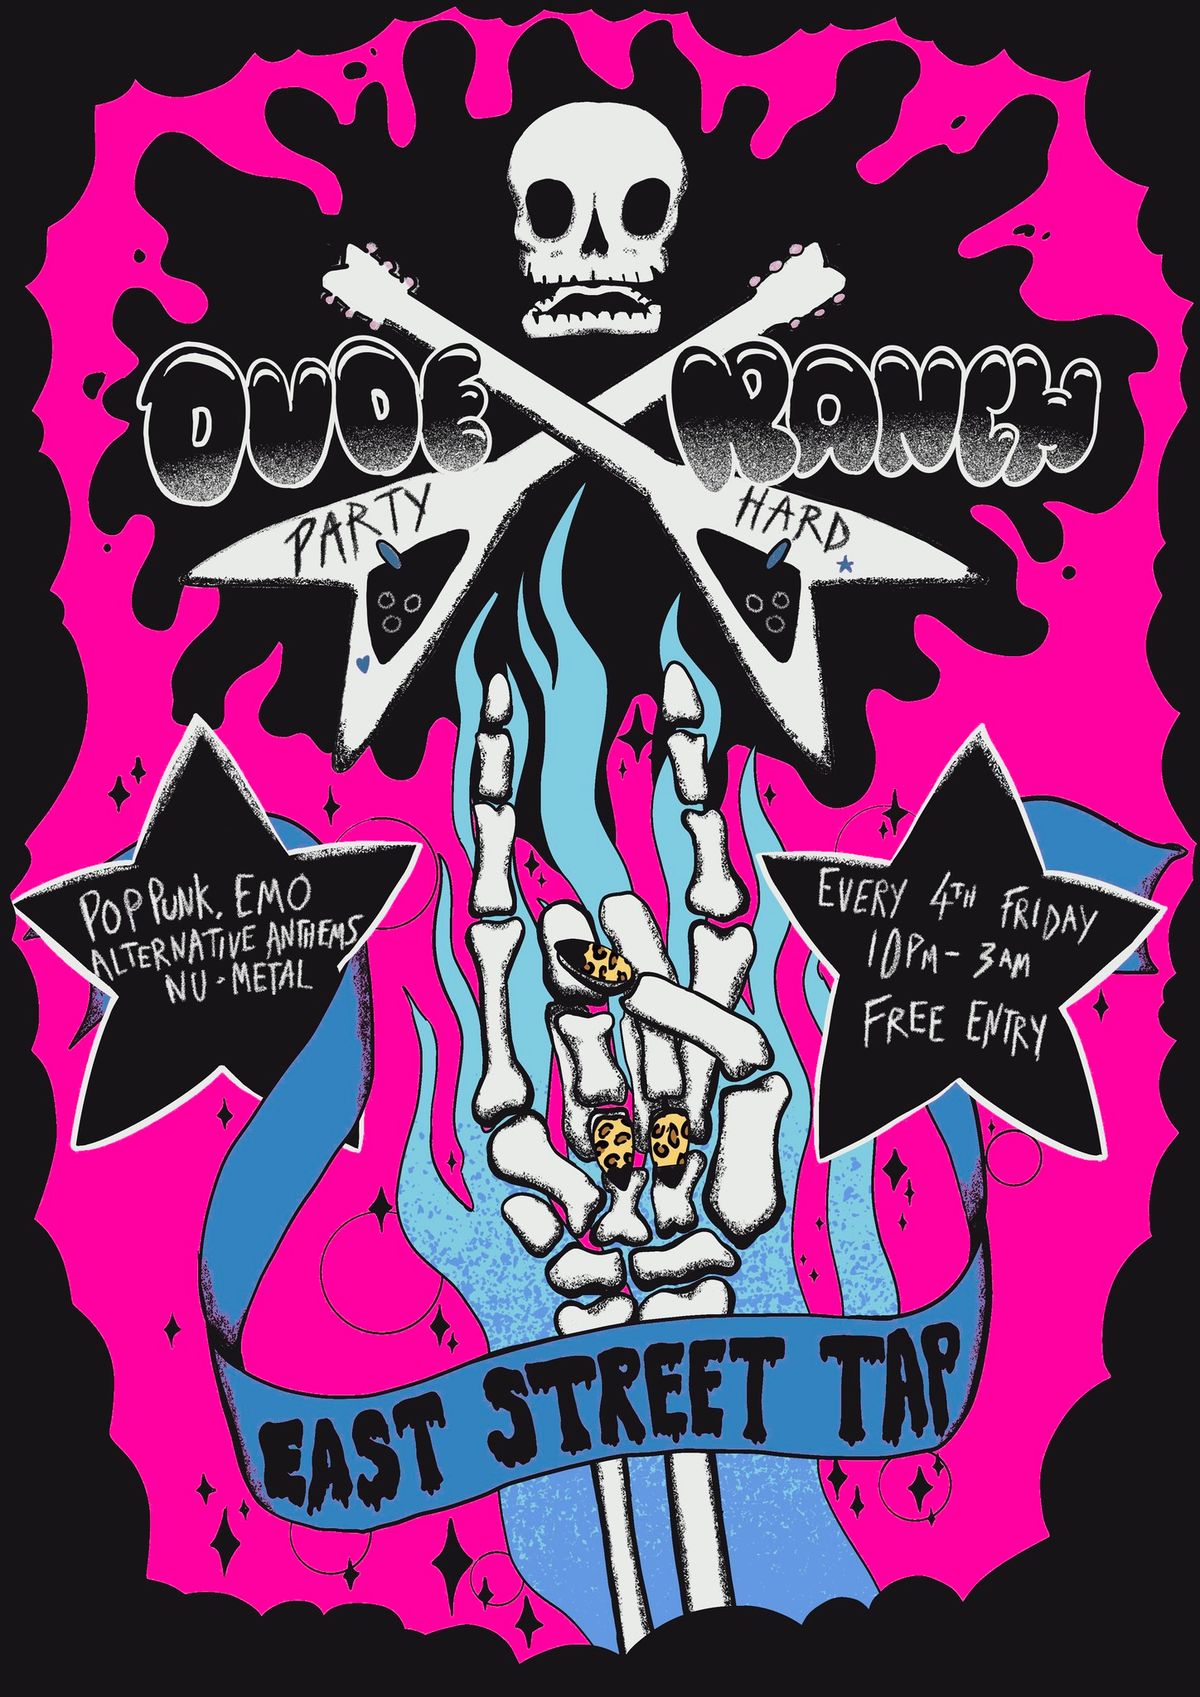 DUDE RANCH \\m\/ FRIDAY JUNE 28TH AT EAST STREET TAP 